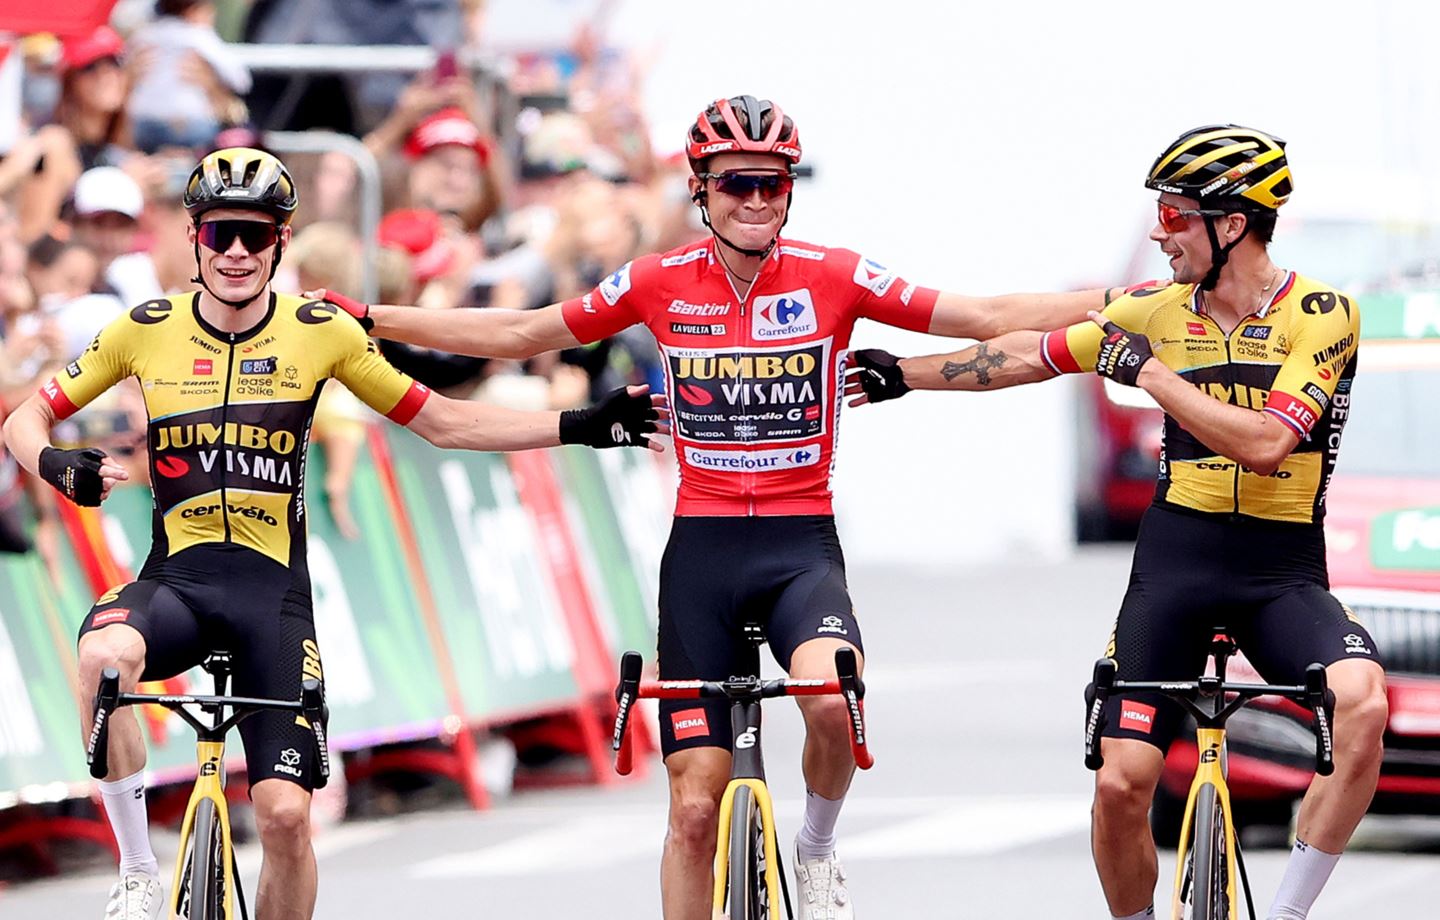 Sepp Kuss, Primoz Roglic, and JOnas Vingegaard cross the finish line together at the Vuelta a Espana